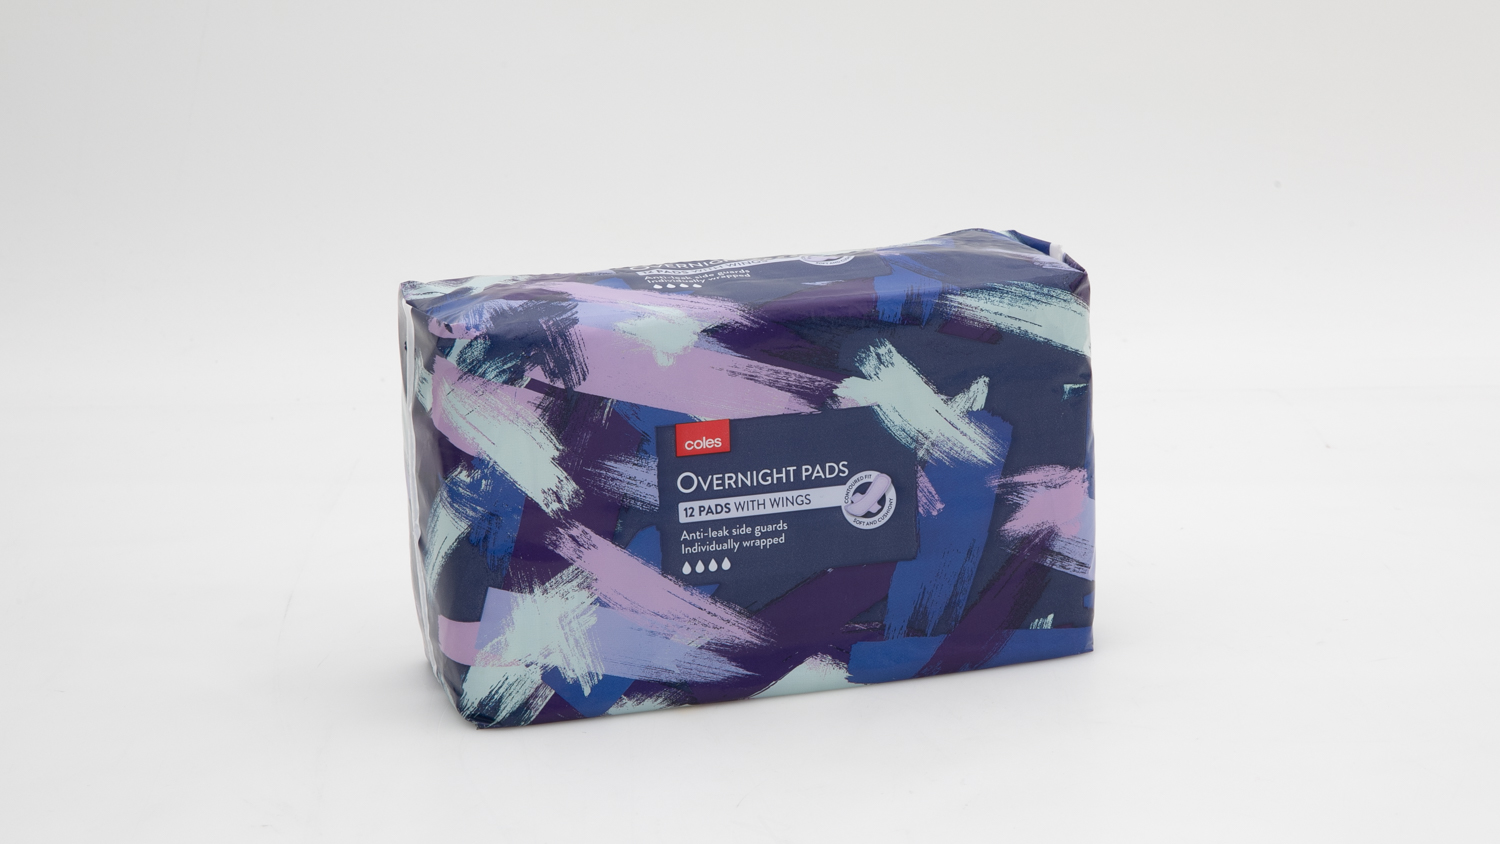 Coles Overnight Pads with wings carousel image